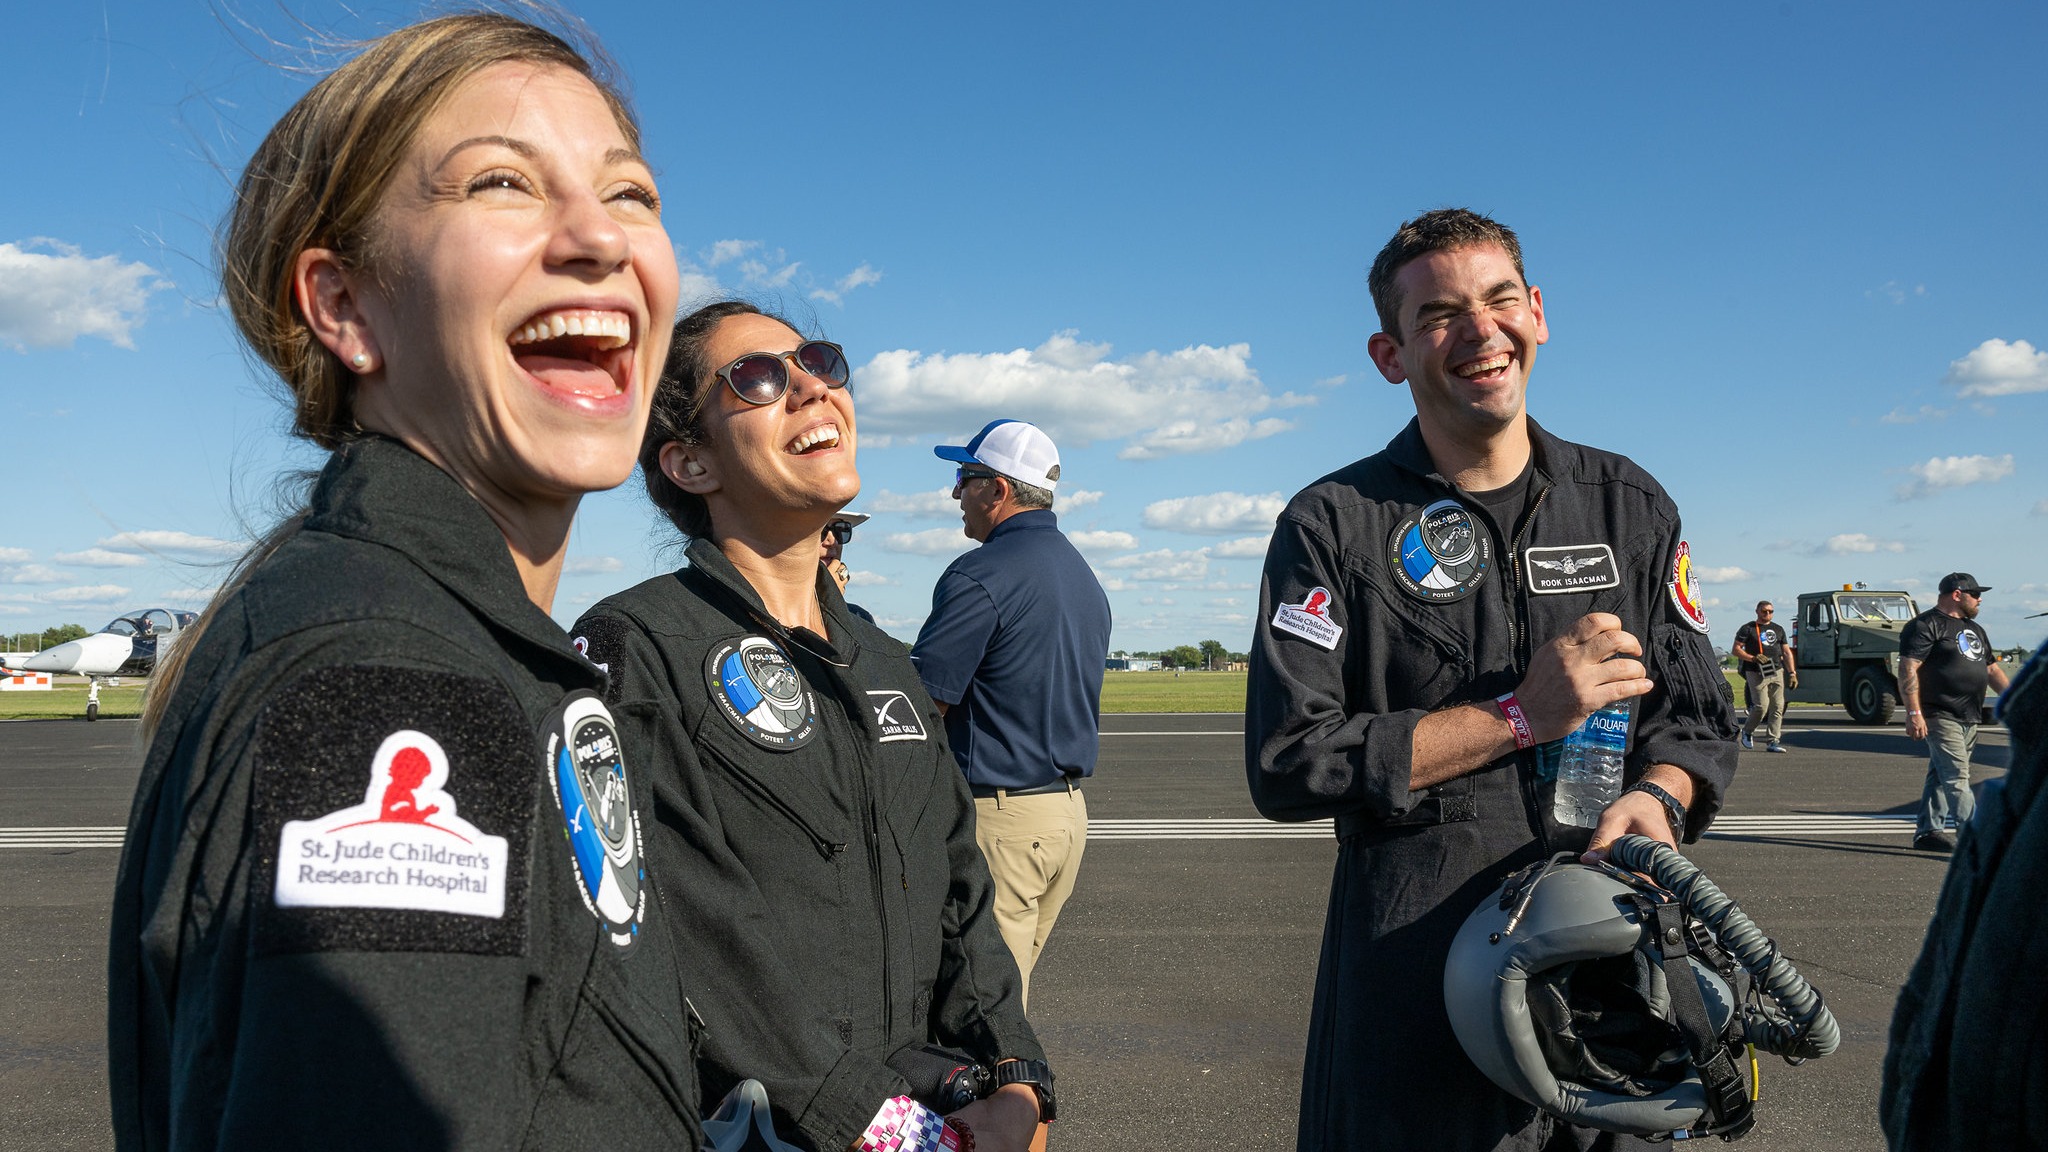 Polaris Dawn crew members react during jet training at the EAA AirVenture Oshkosh in Wisconsin in July 2022.